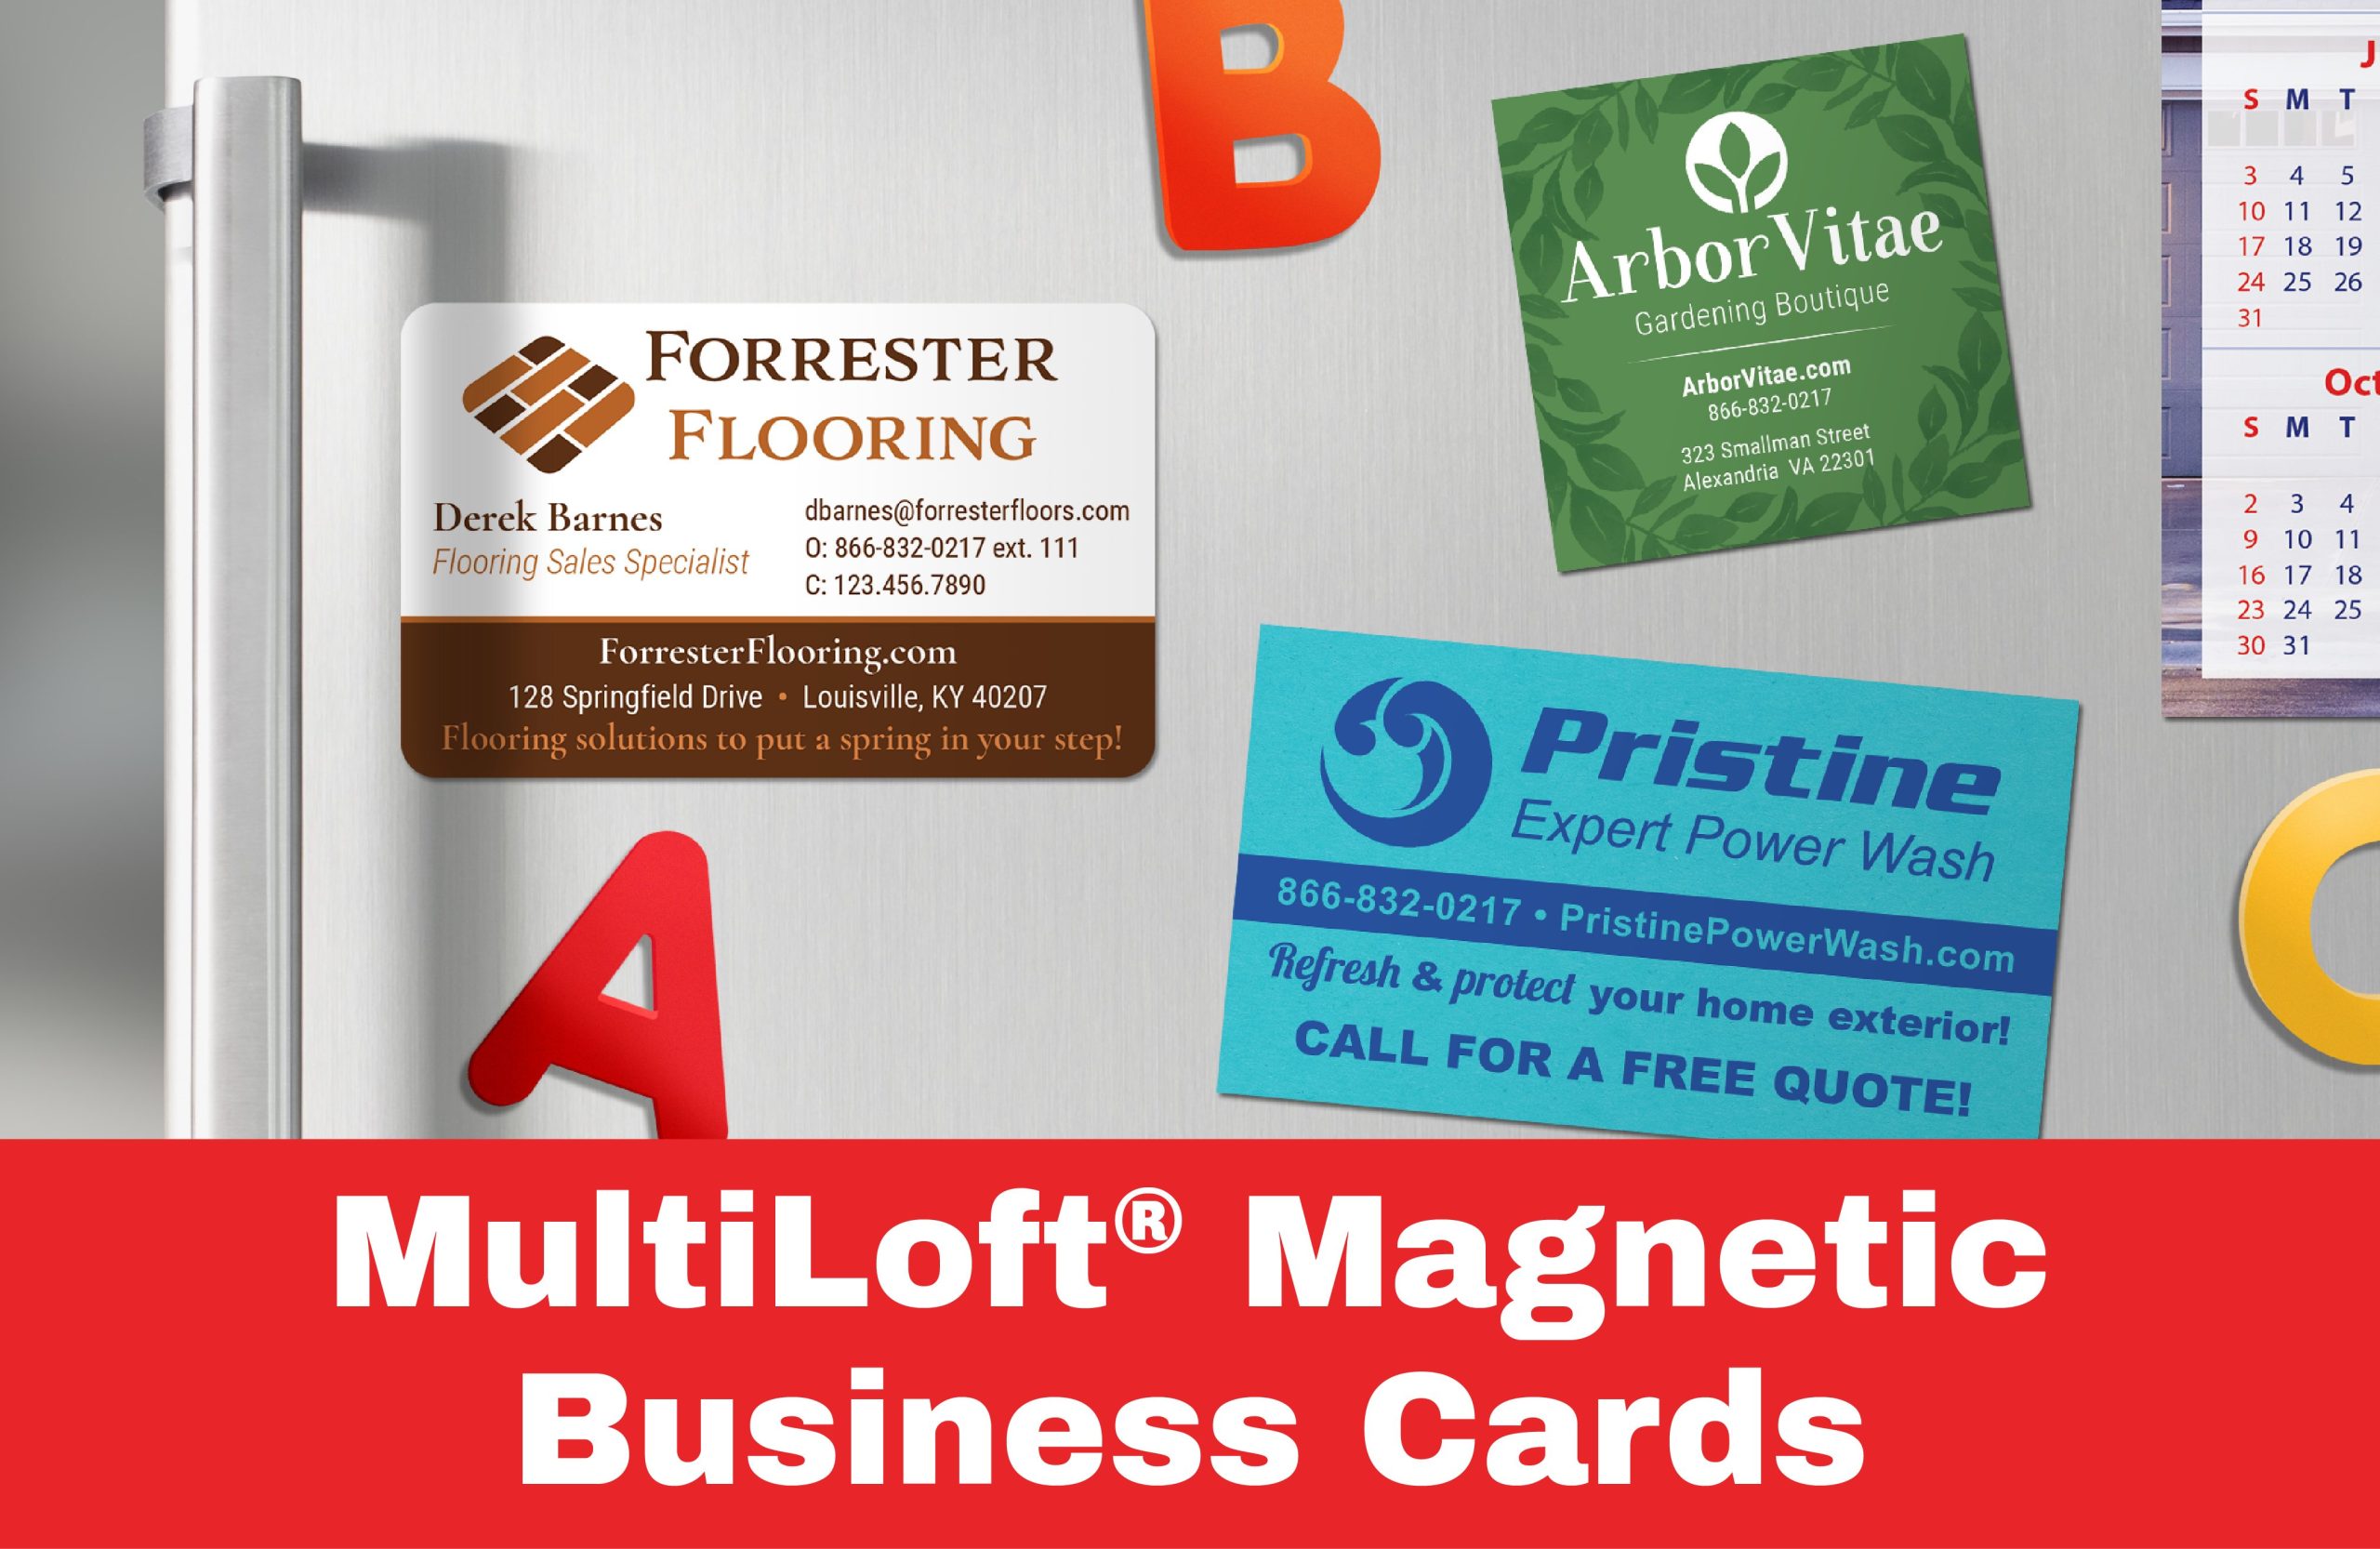 Magnetic Business Cards with MultiLoft®